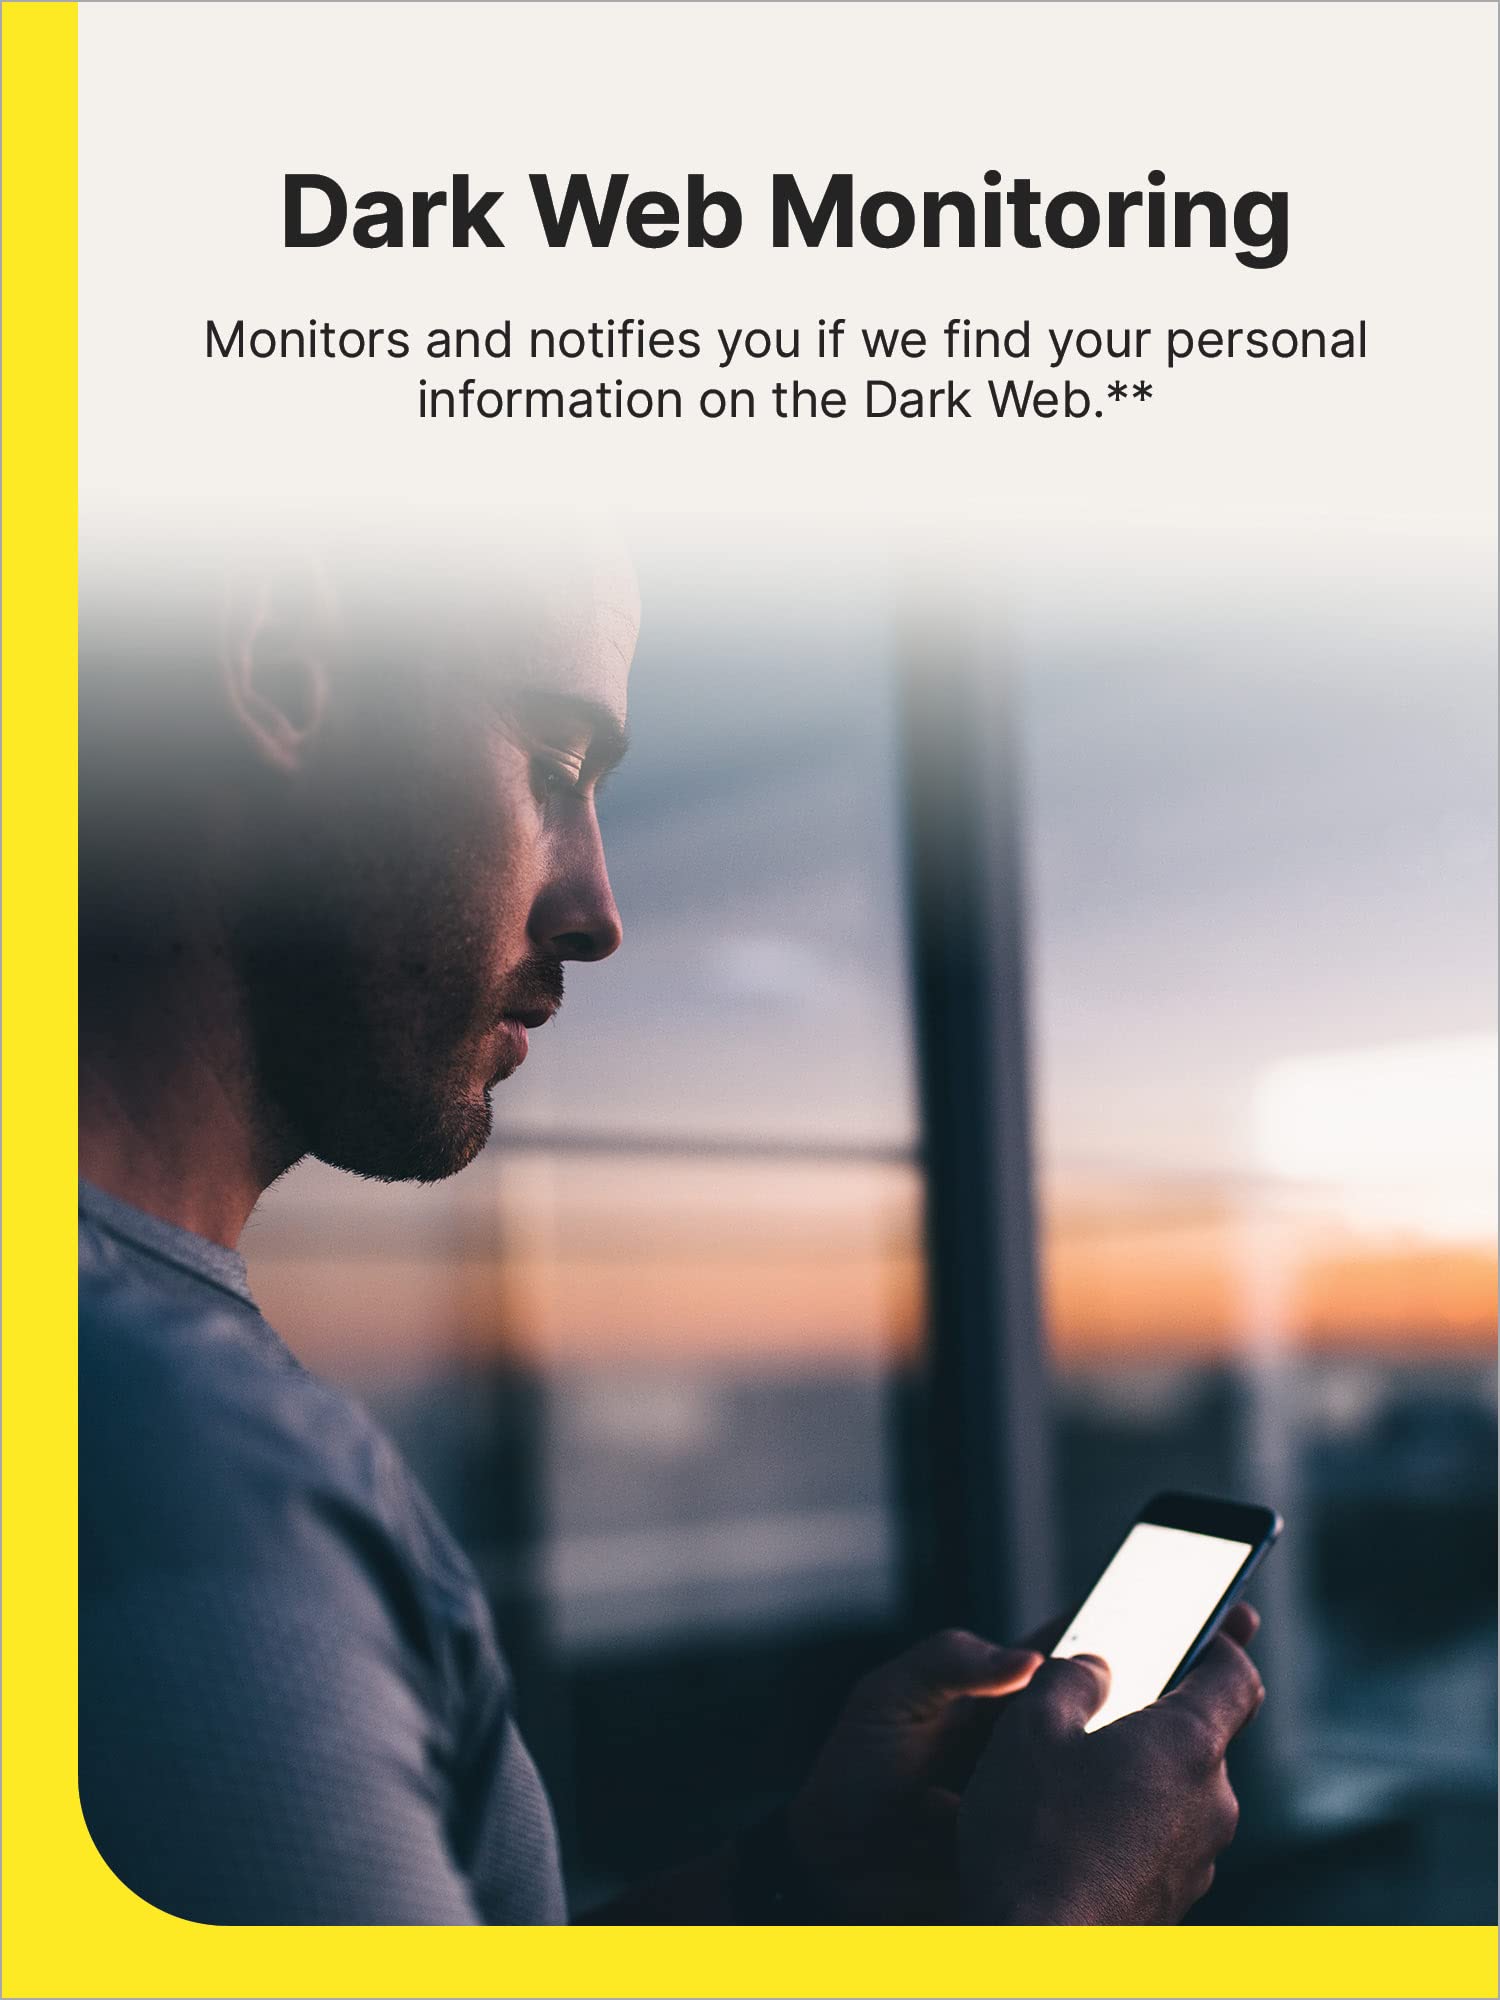 Norton 360 Premium 2023, Antivirus software for 10 Devices with Auto Renewal - Includes VPN, PC Cloud Backup & Dark Web Monitoring [Key card]